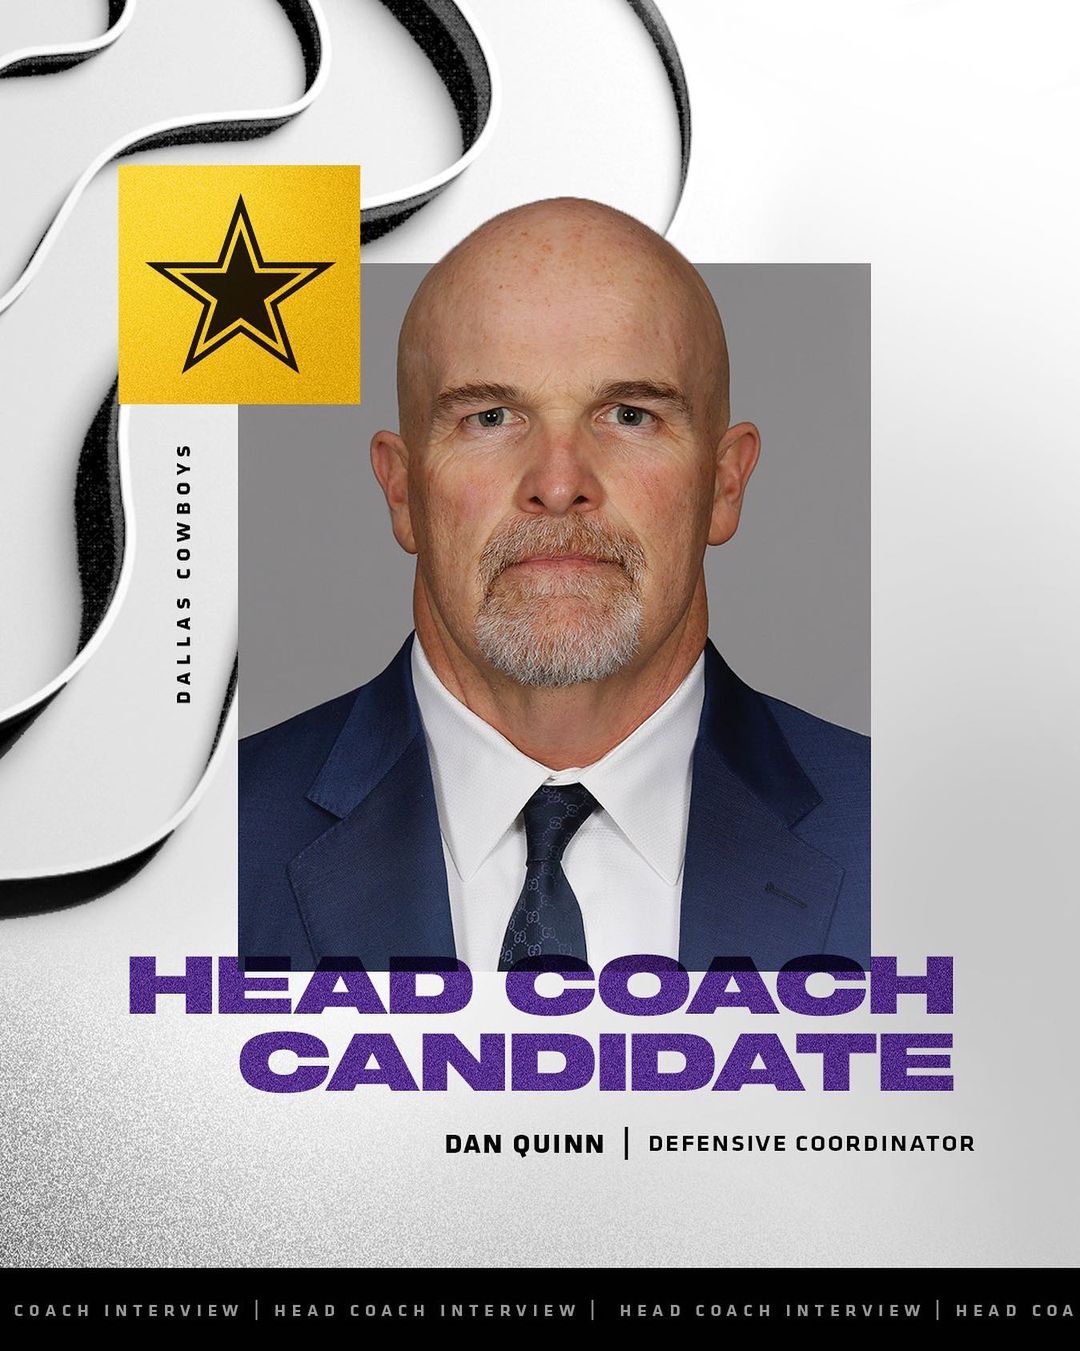 We have completed an interview with Cowboys Defensive Coordinator Dan Quinn for ...